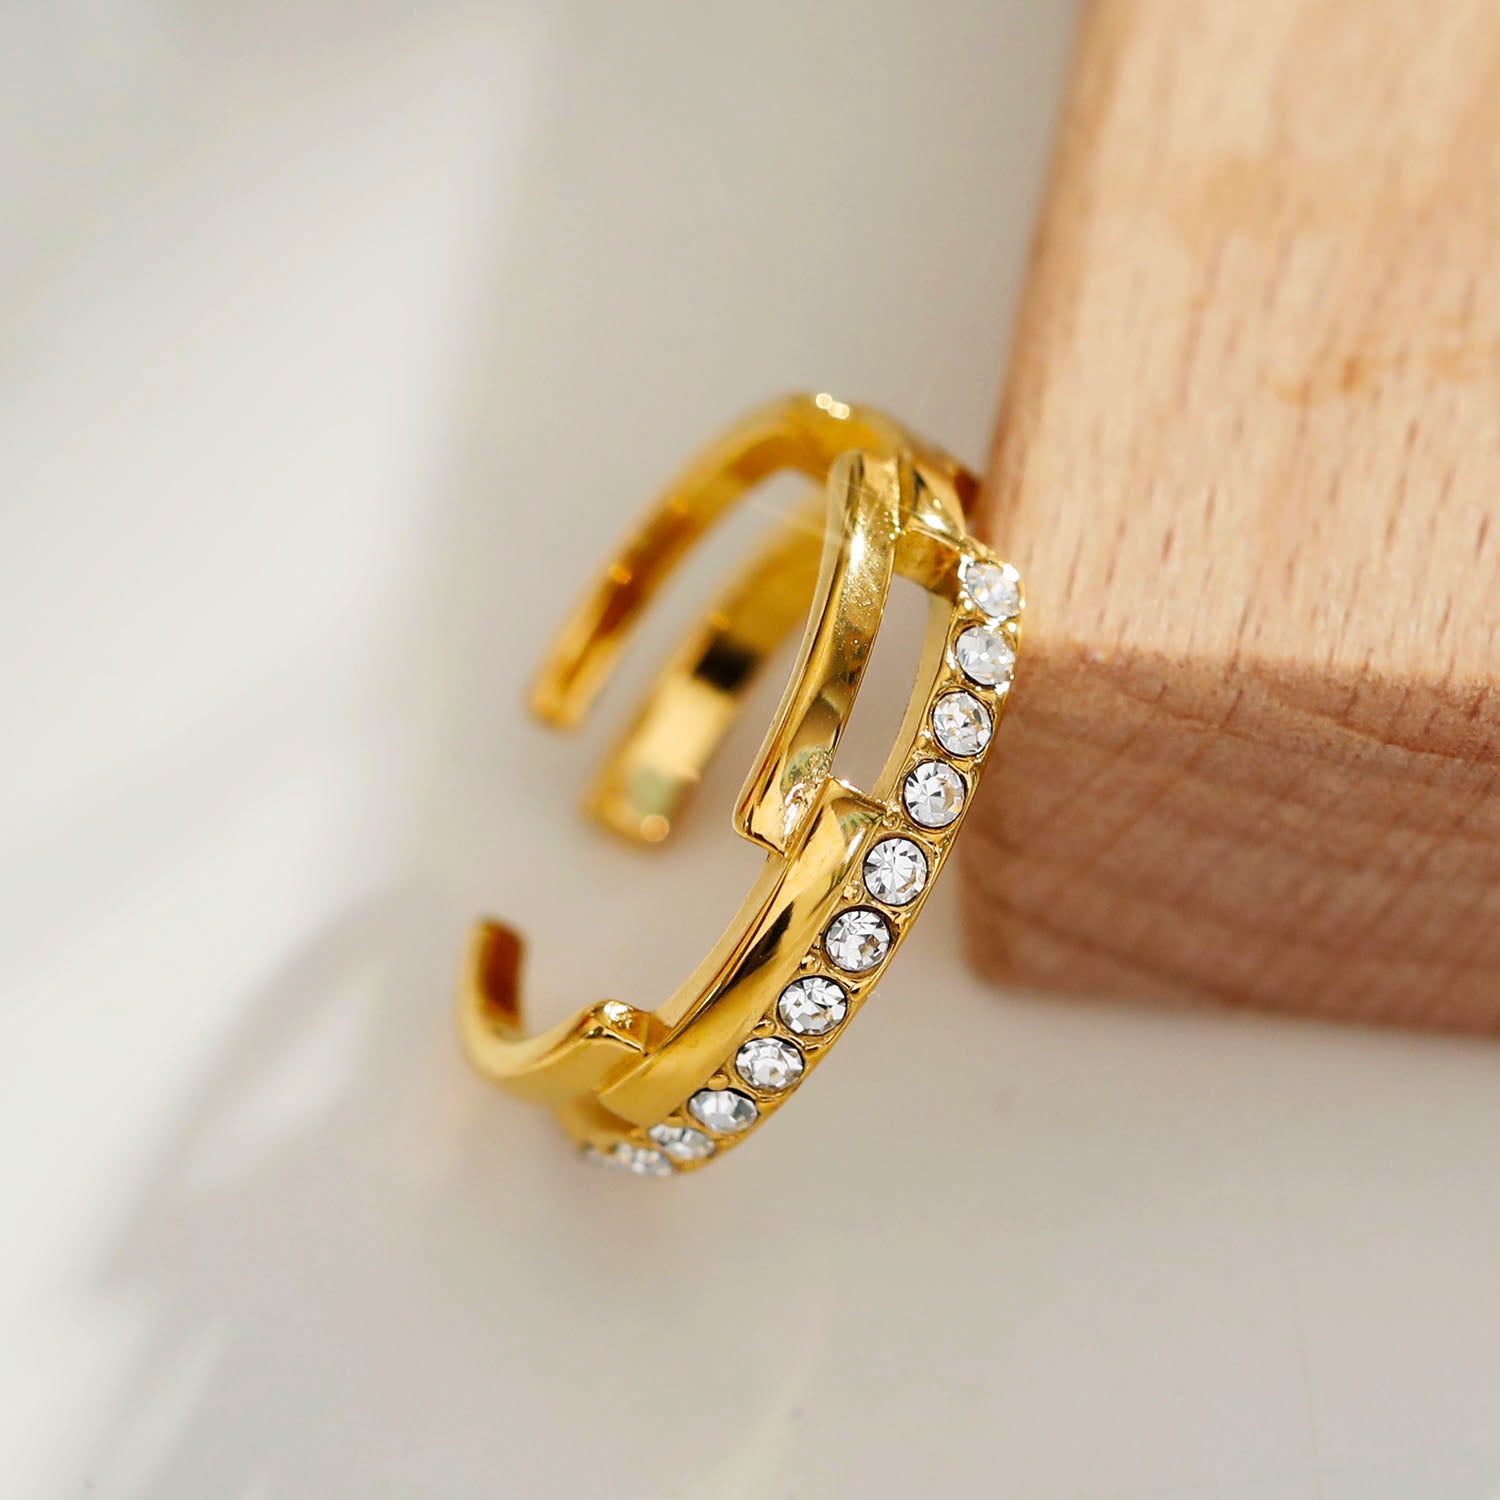 Style PEDRA 221129: Parallel Multi Stacked Zirconia Embellished Ring.